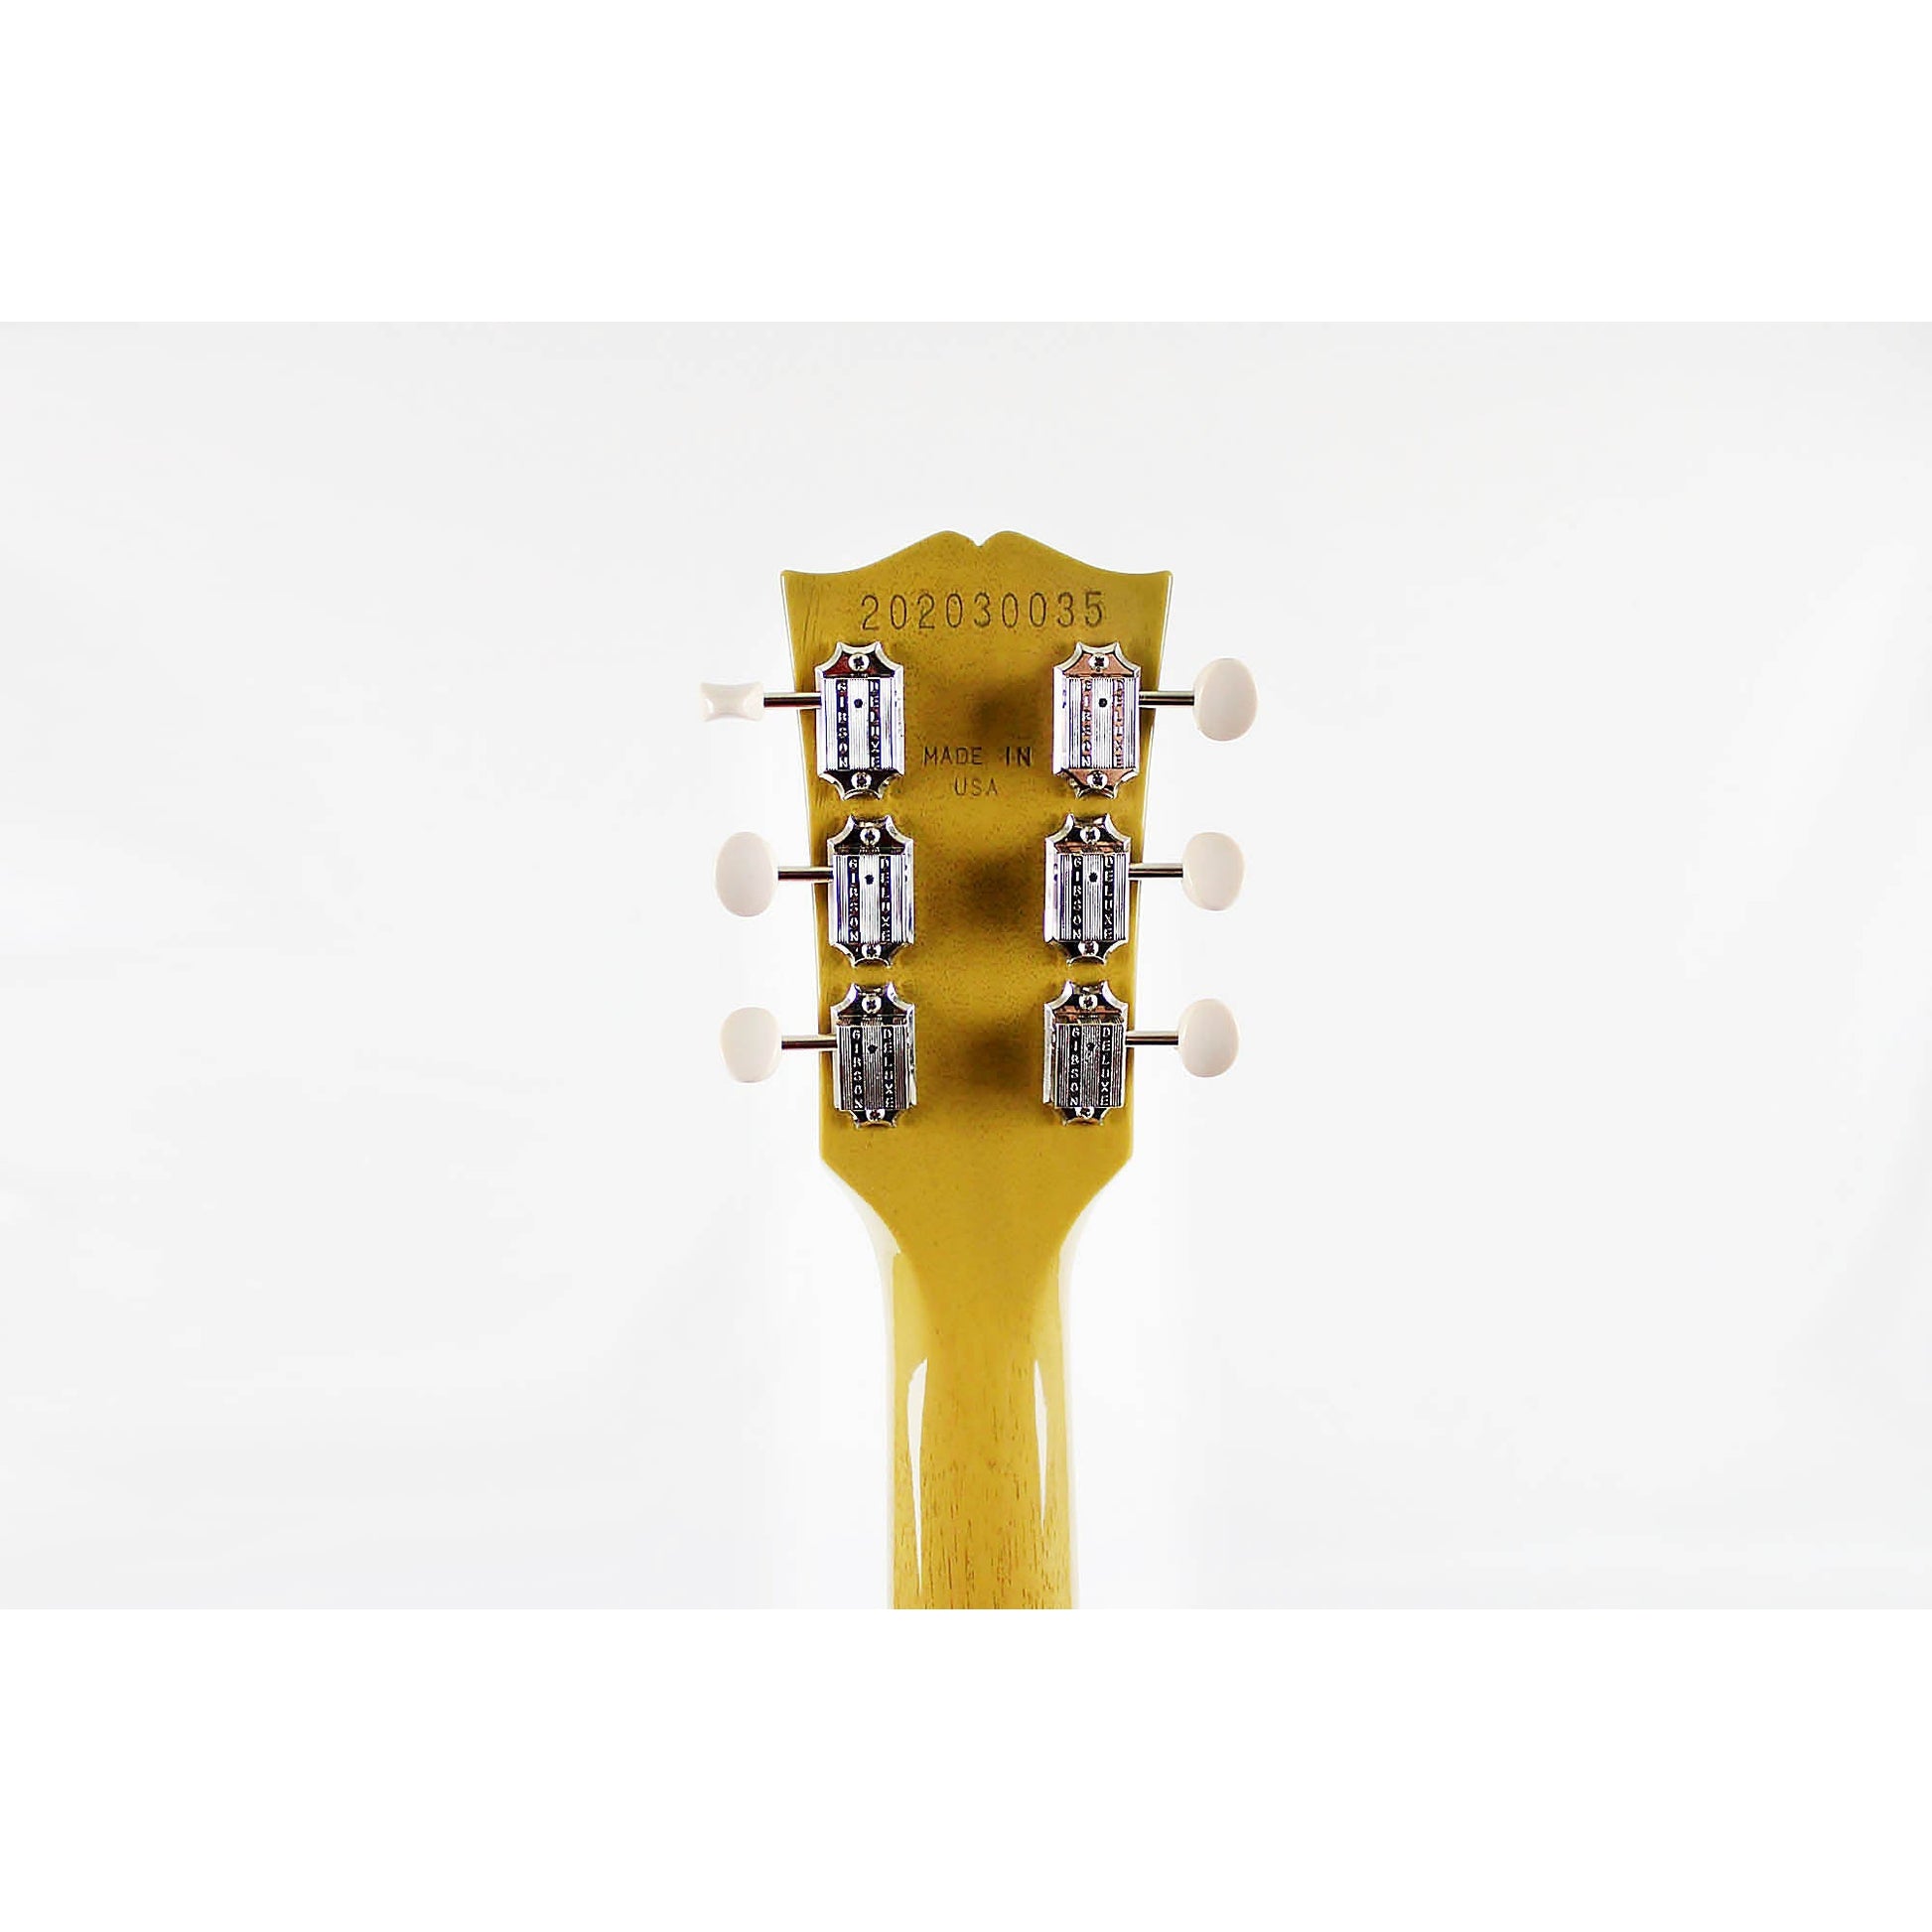 Gibson Les Paul Special - TV Yellow - Leitz Music-711106035604-LPSP00TVNH1